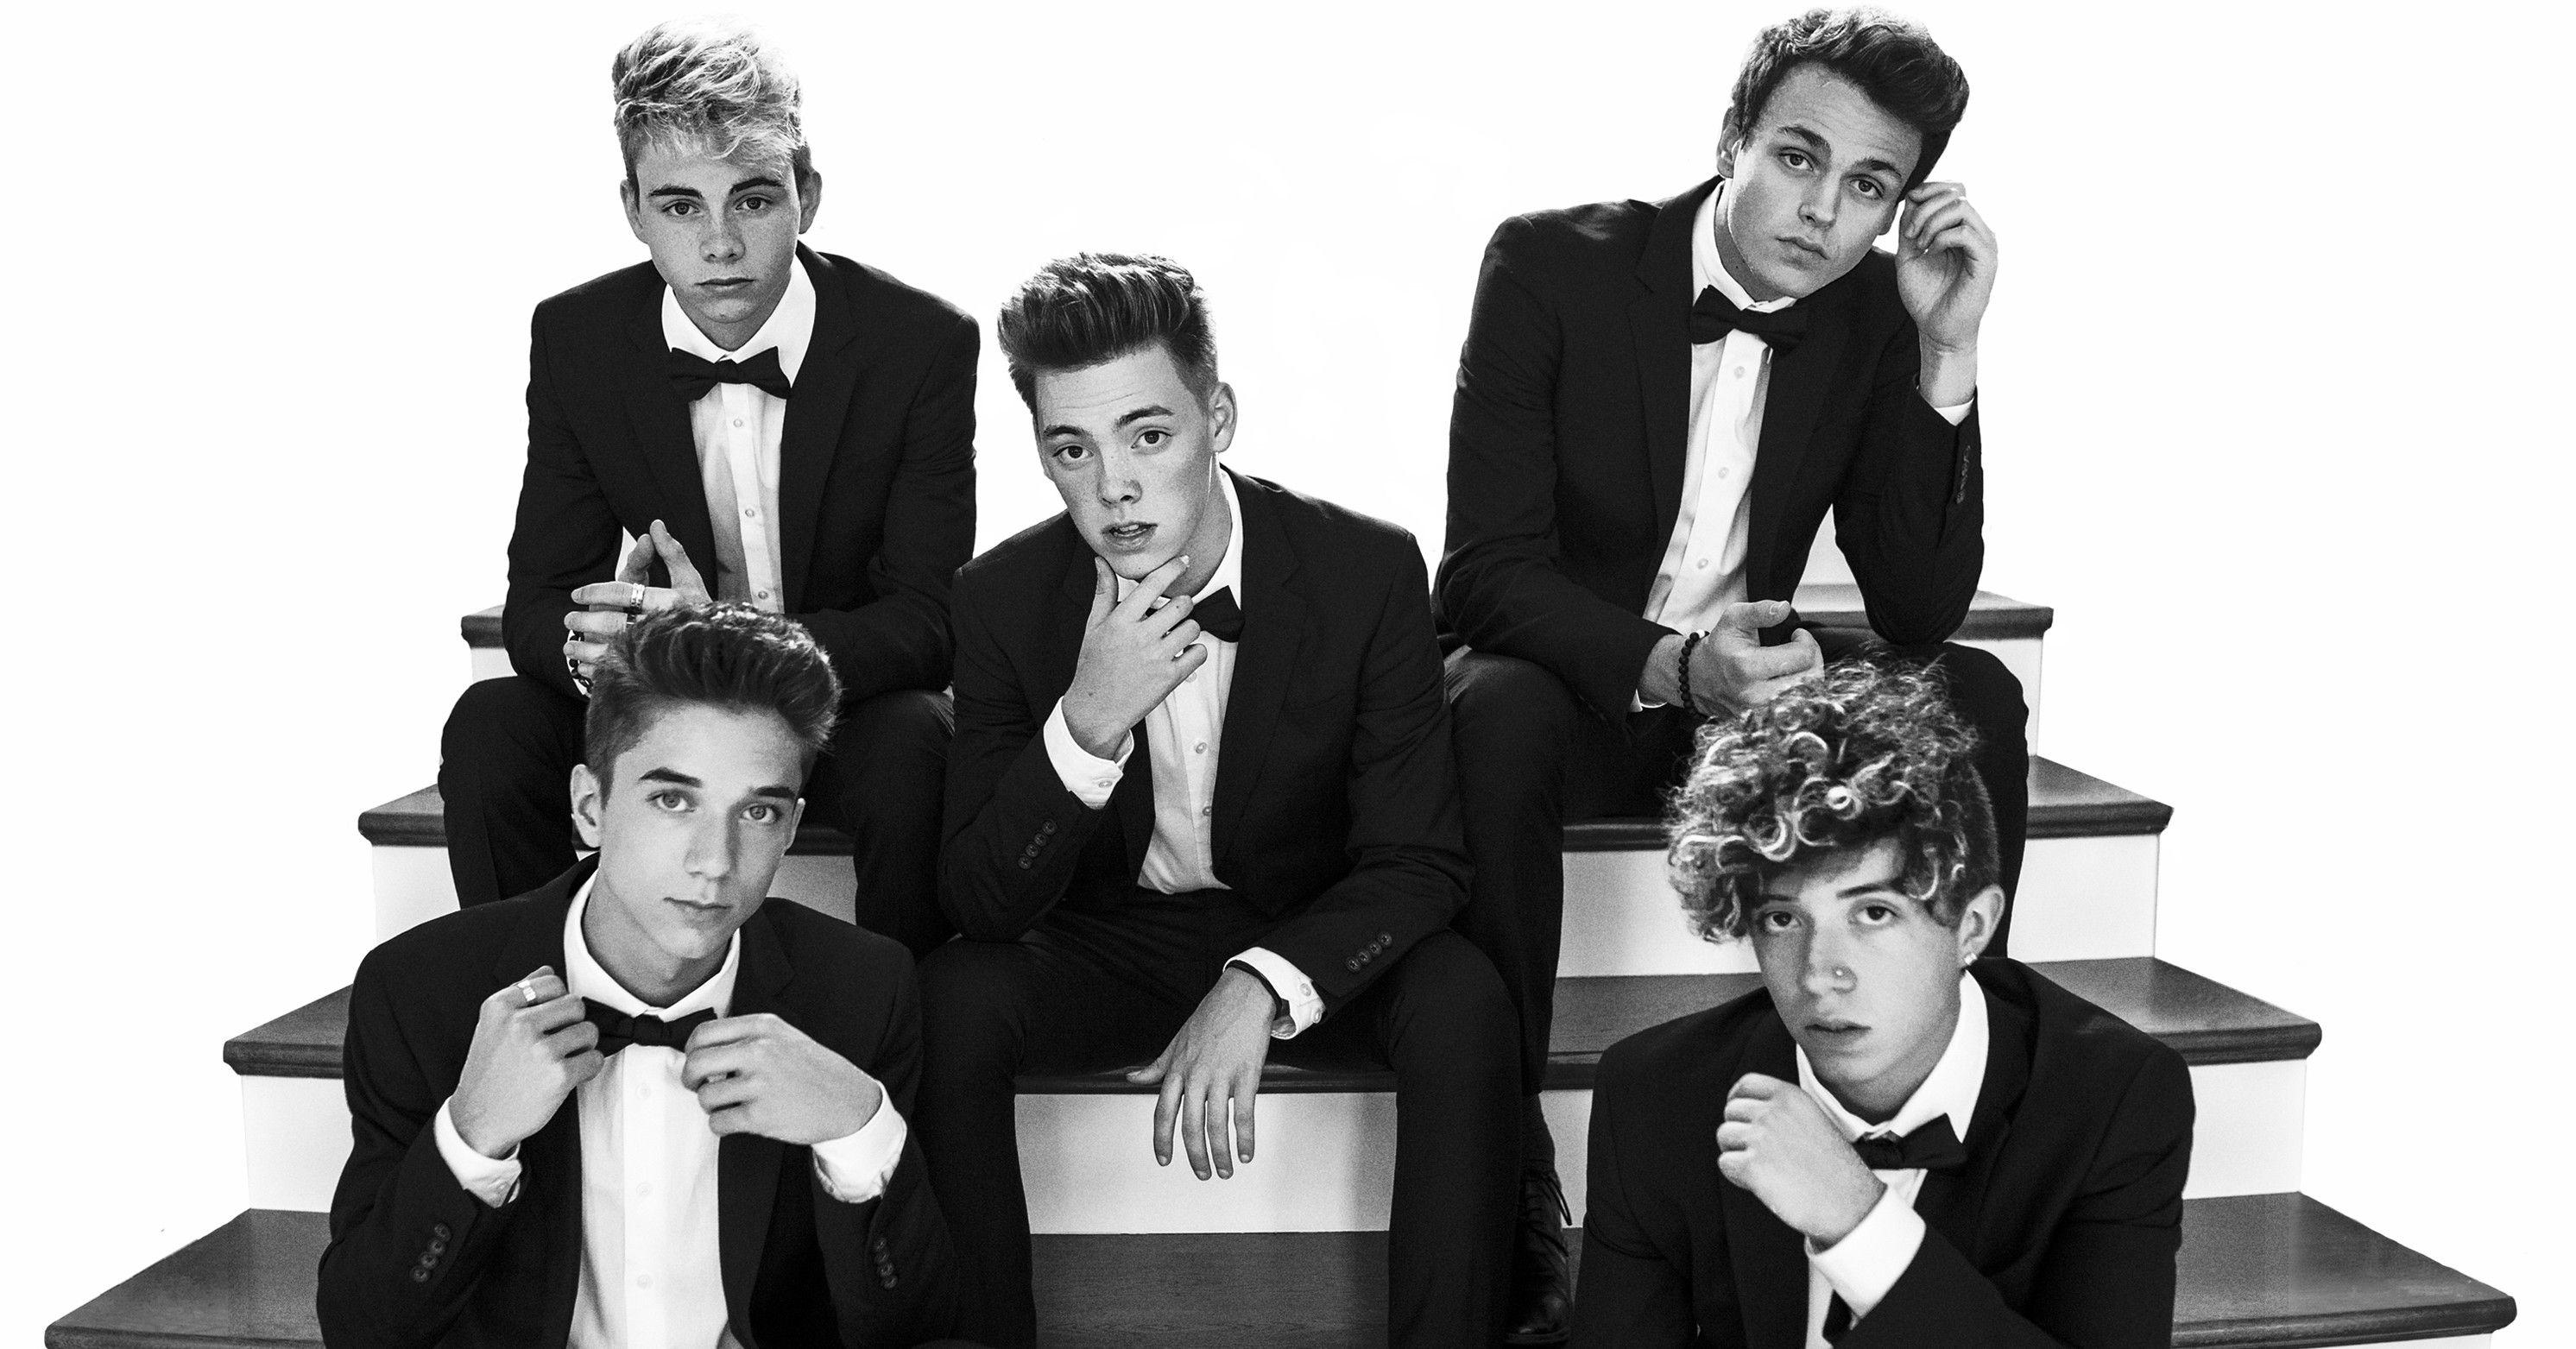 Things To Know About The Boyband Why Don't We